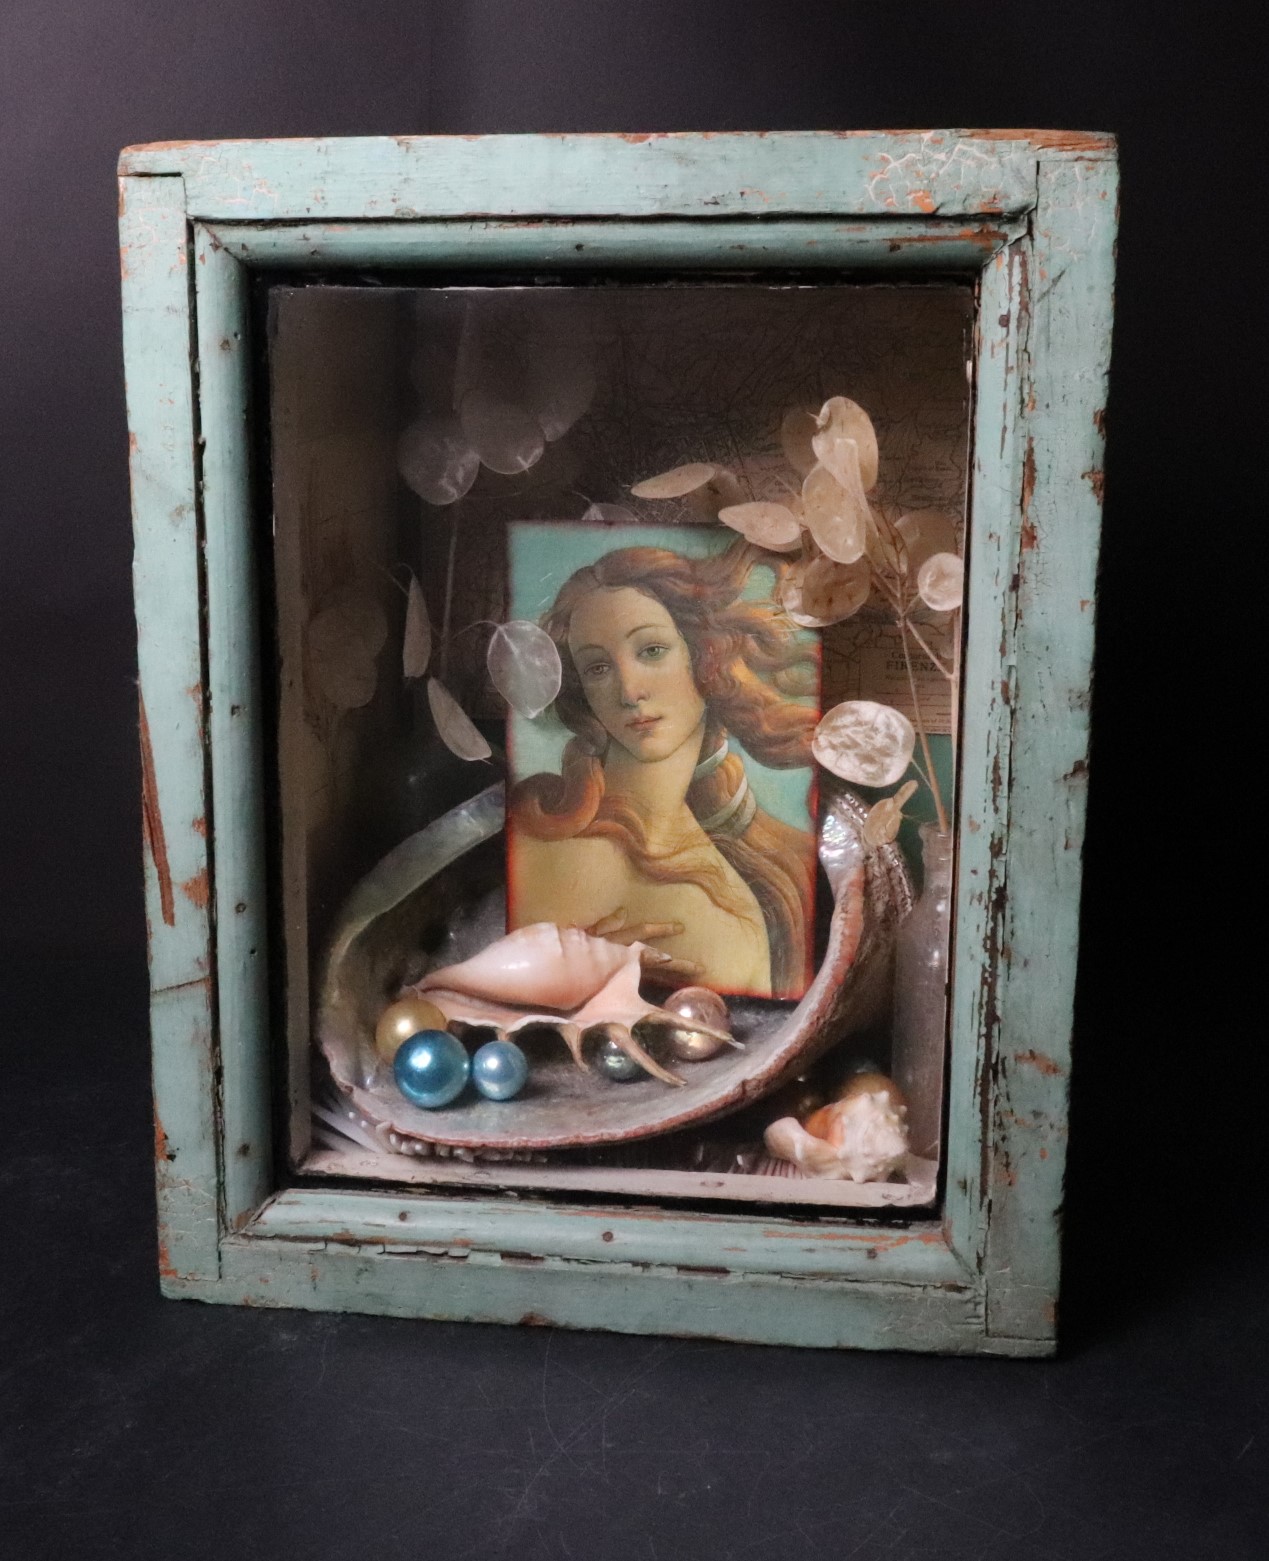 Stephen Miner, “Lady in the Clam Shell”, mixed media